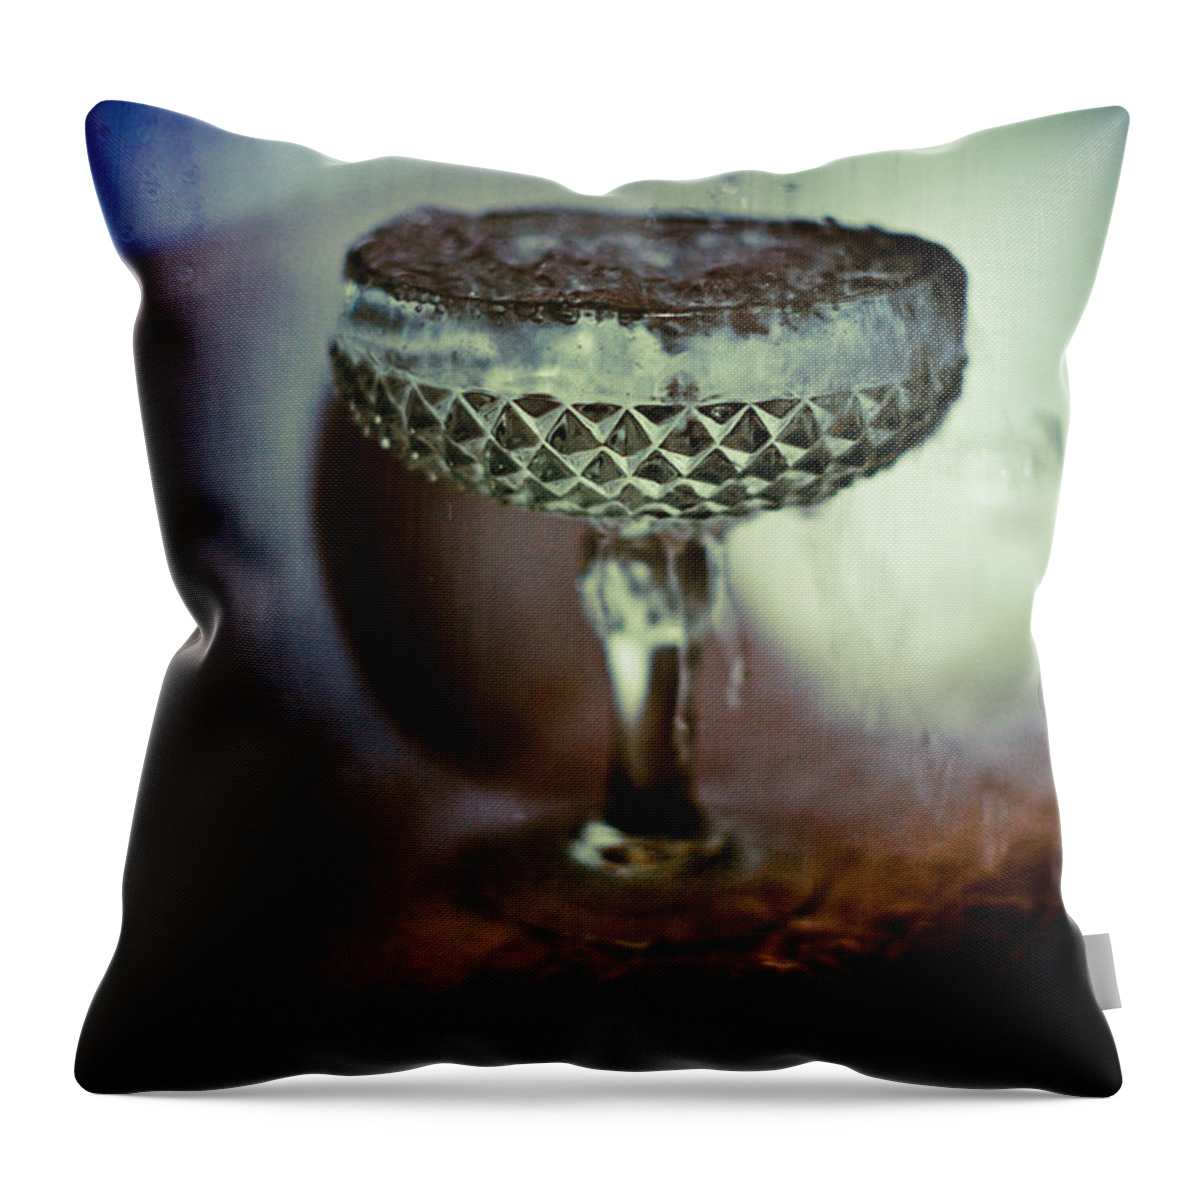 Cup Throw Pillow featuring the photograph A cup by Scott Sawyer